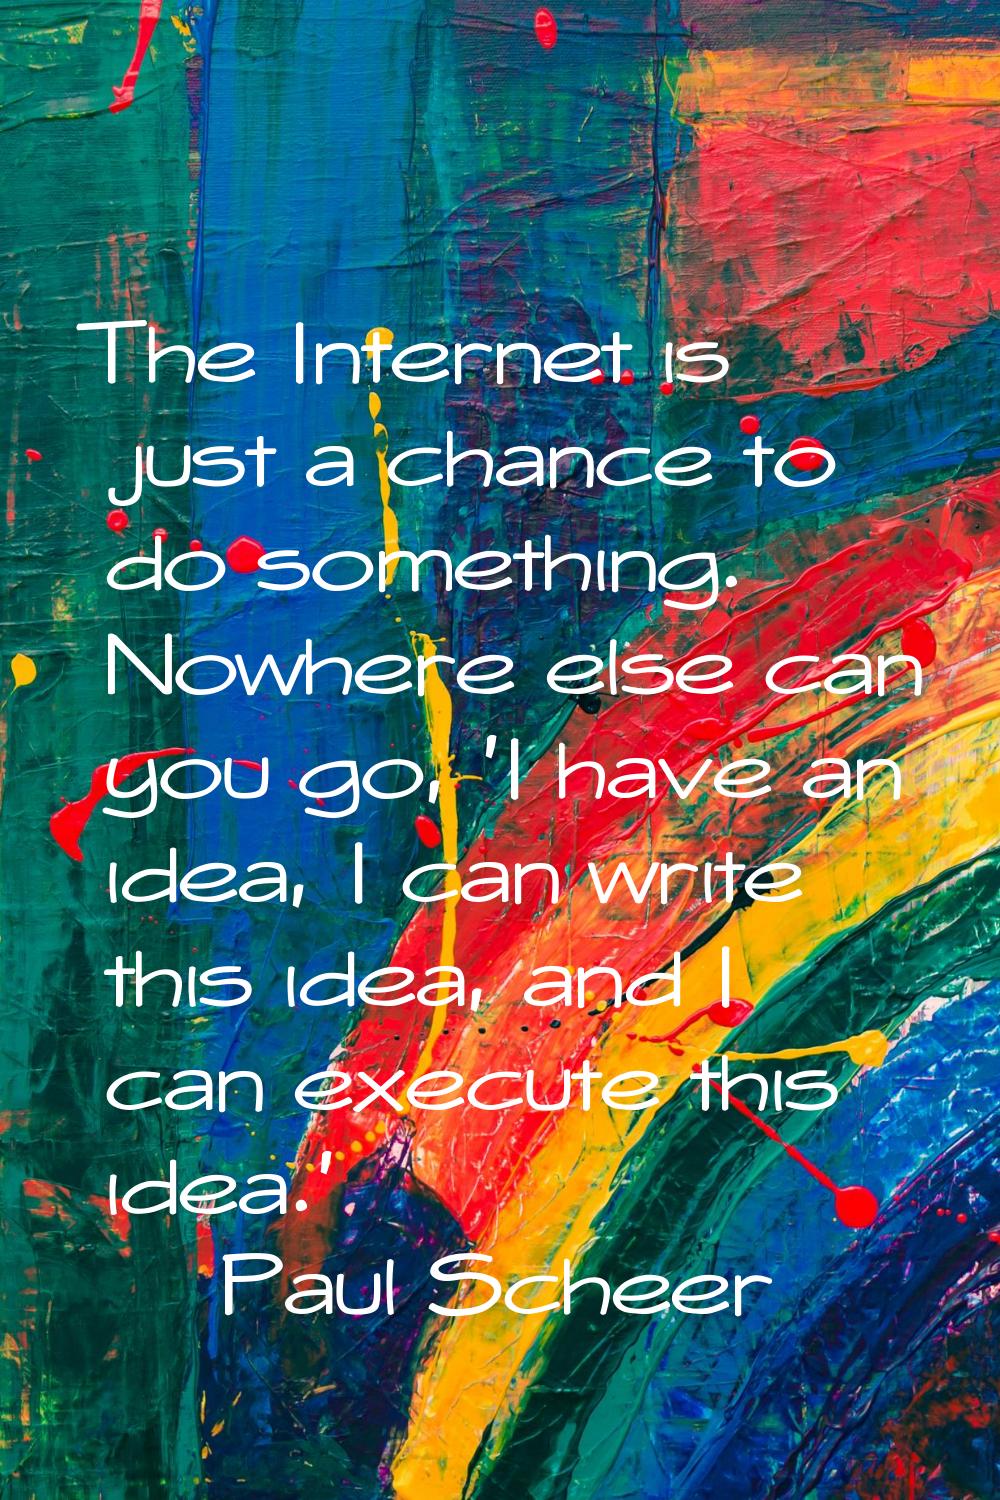 The Internet is just a chance to do something. Nowhere else can you go, 'I have an idea, I can writ